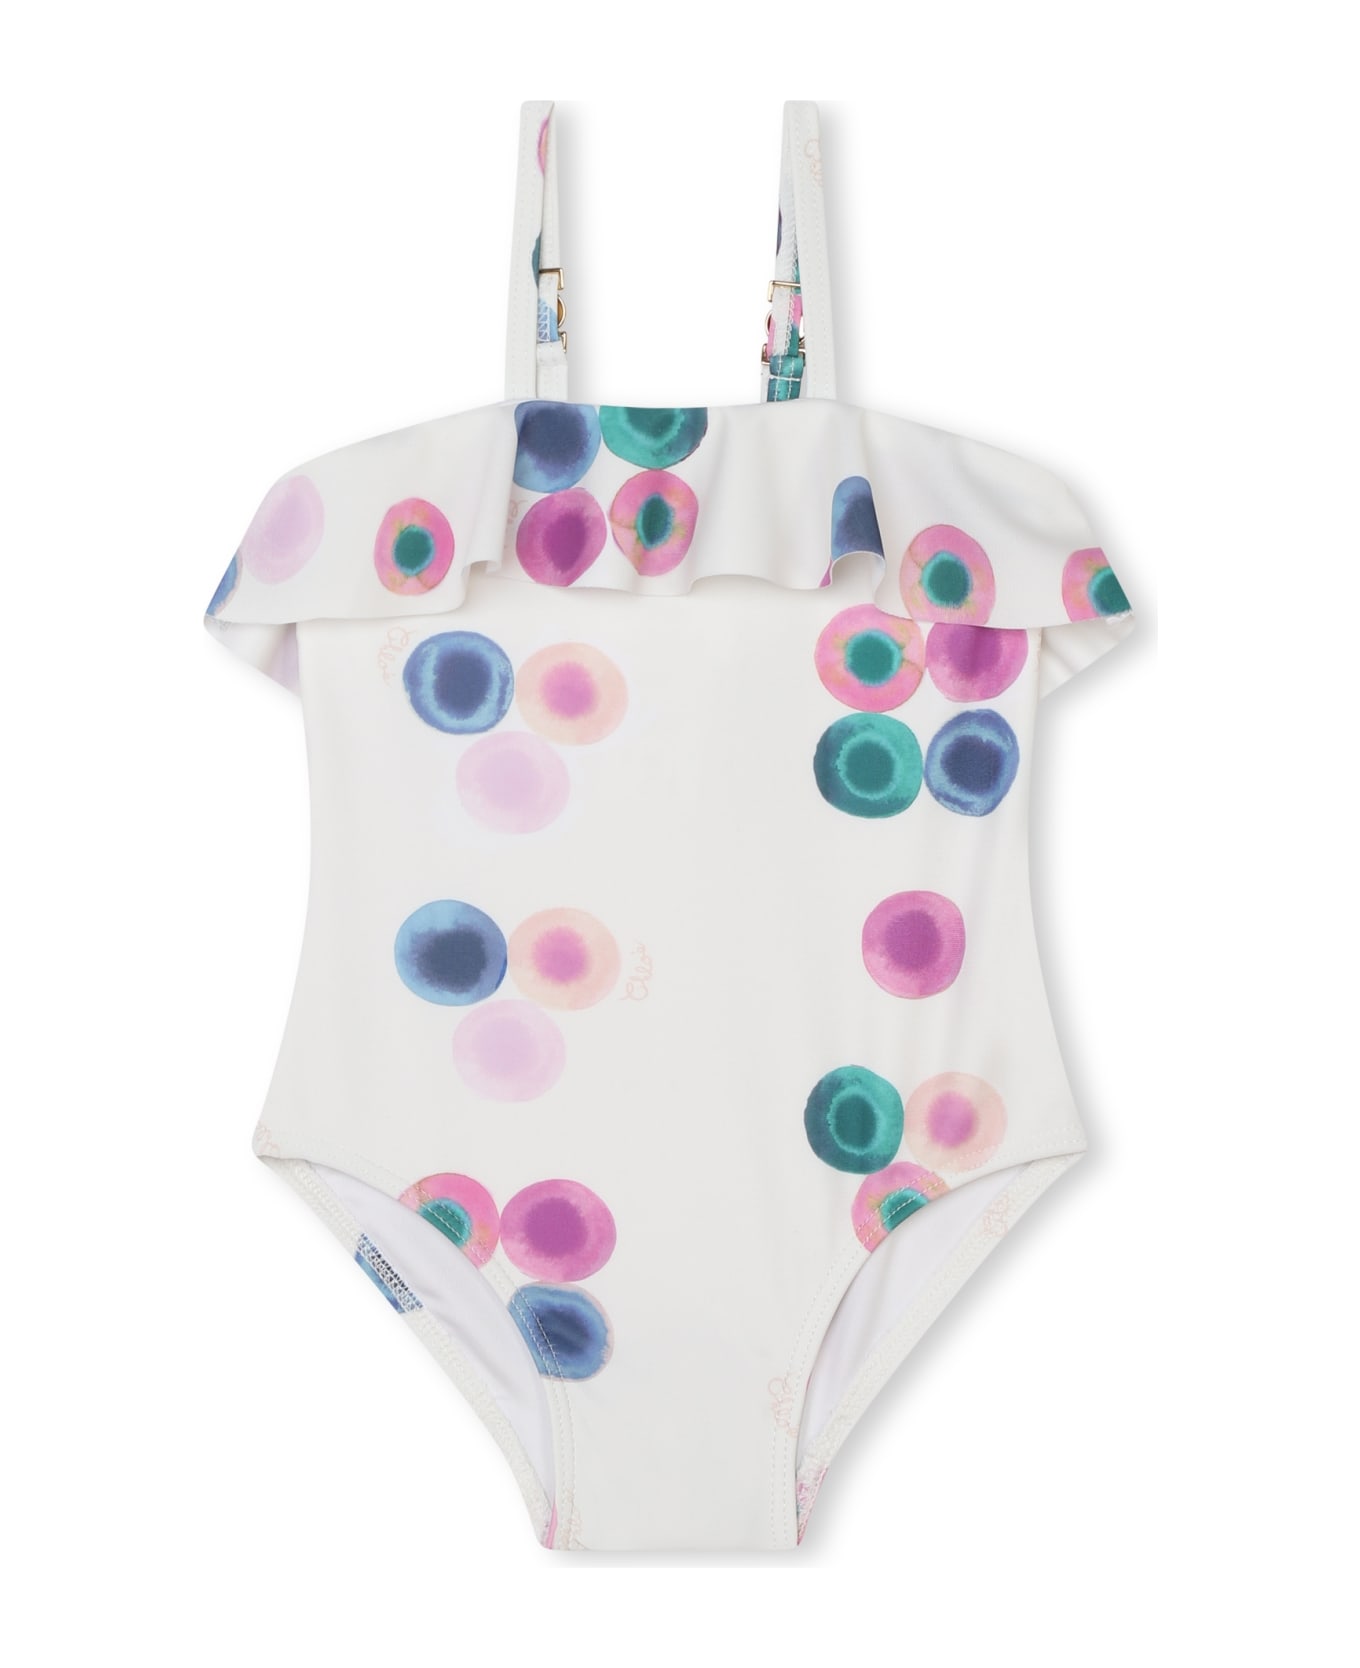 Chloé One-piece Swimsuit With Abstract Print - Multicolor 水着